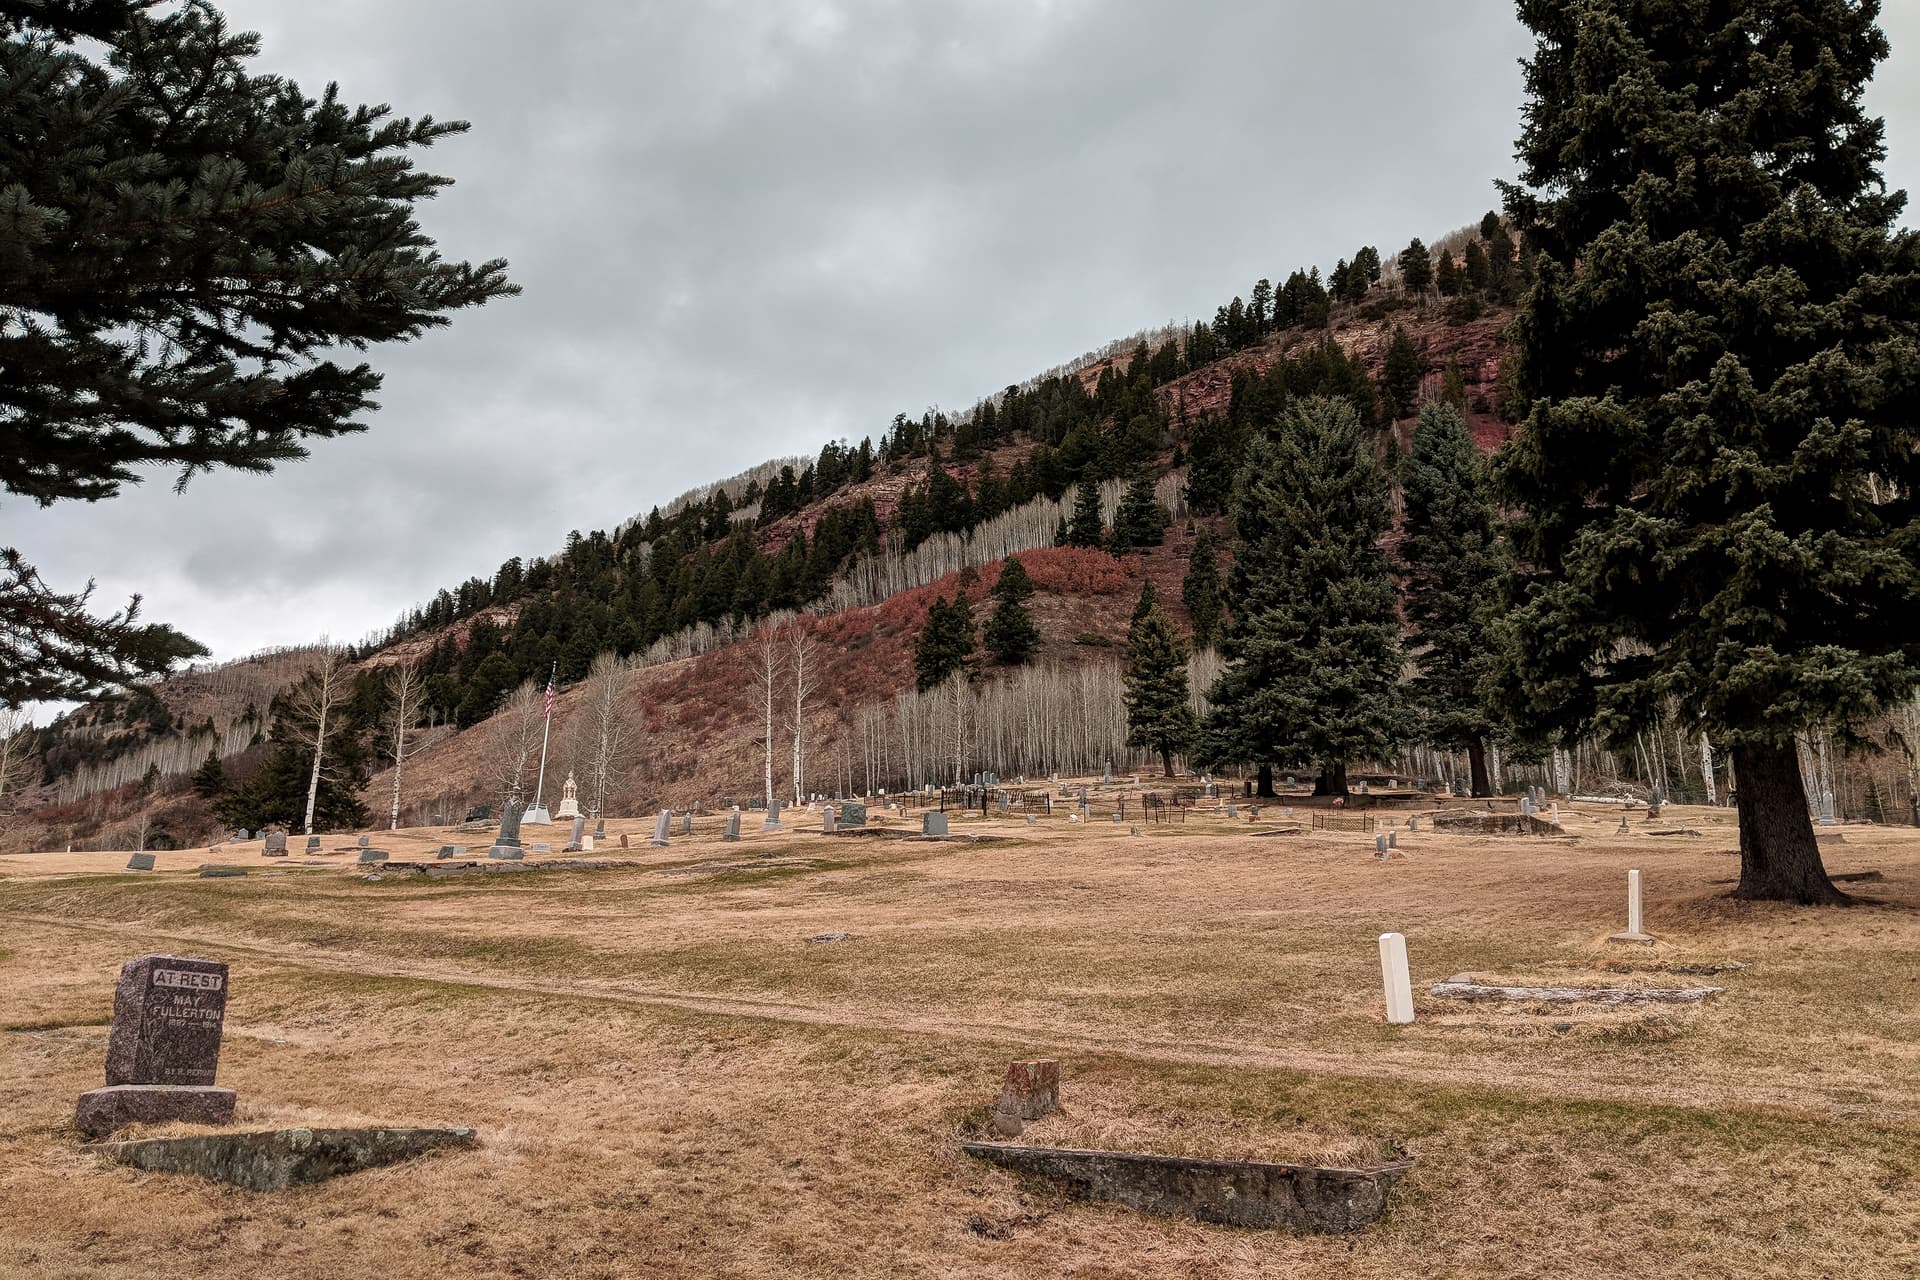 A mountain cemetary. The sky is cold and gray, but some of the bushes on the small rise behind the cemetary are a striking red color.